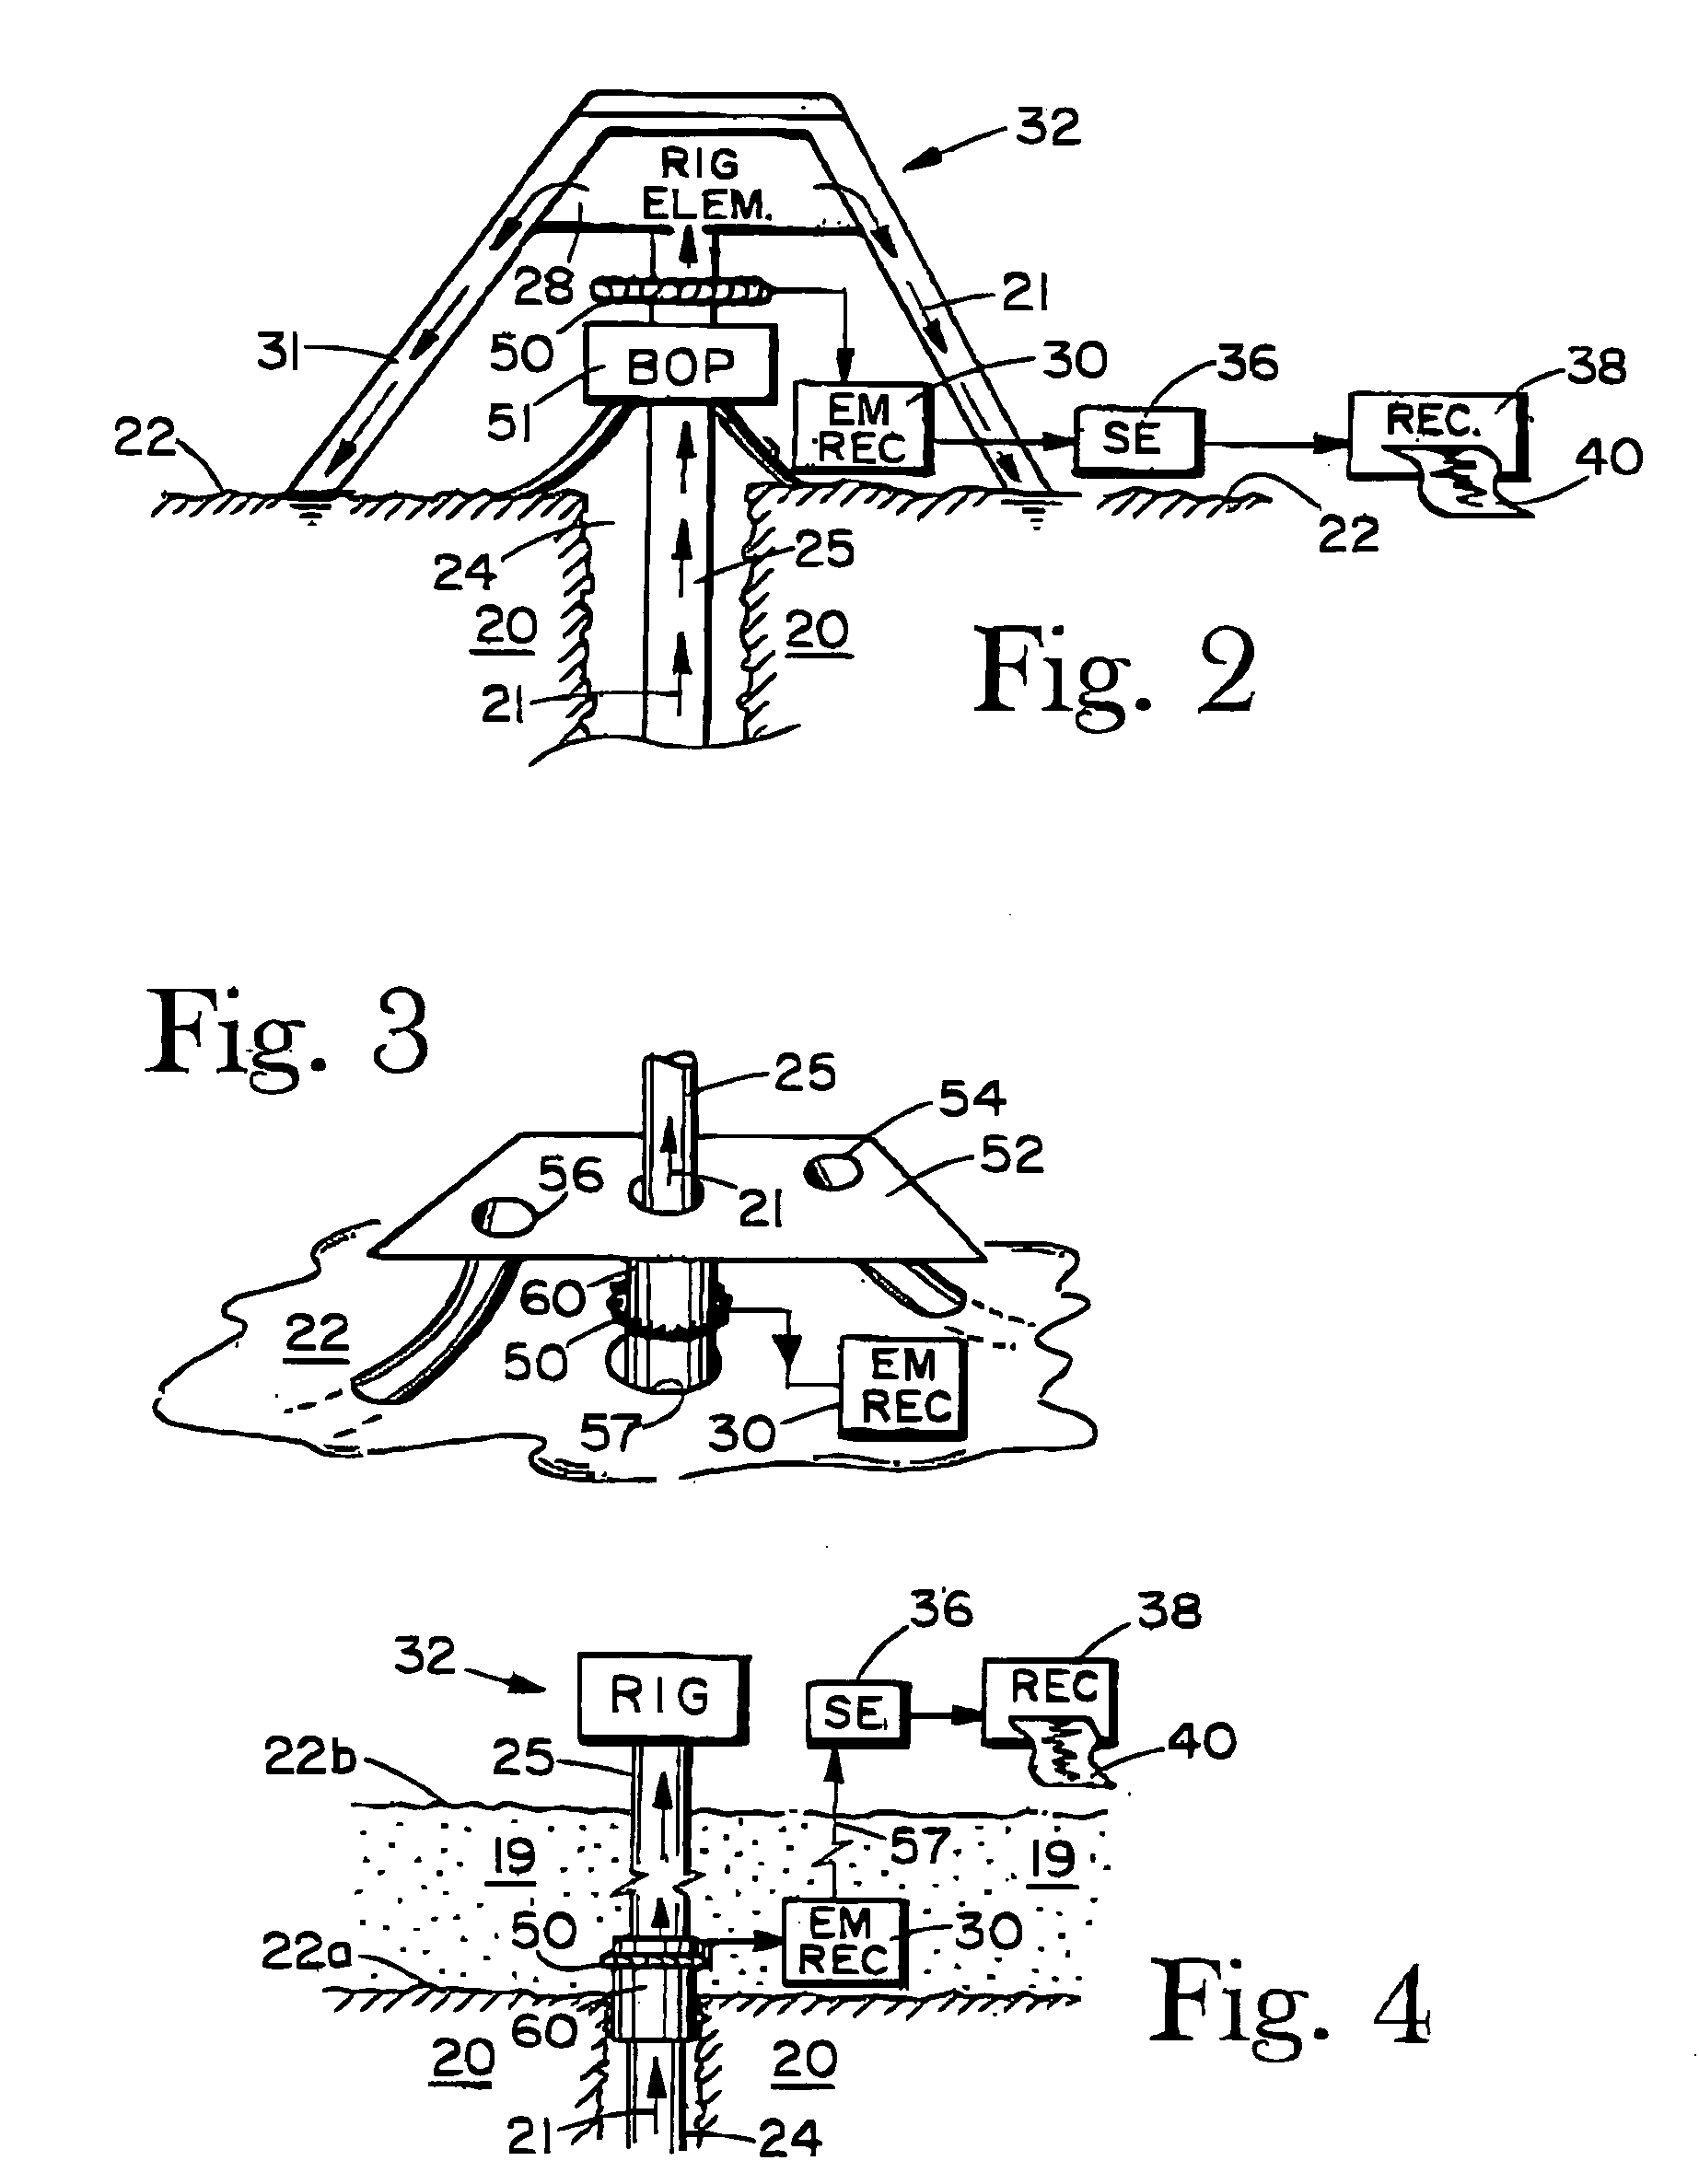 Electromagnetic MWD telemetry system incorporating a current sensing transformer